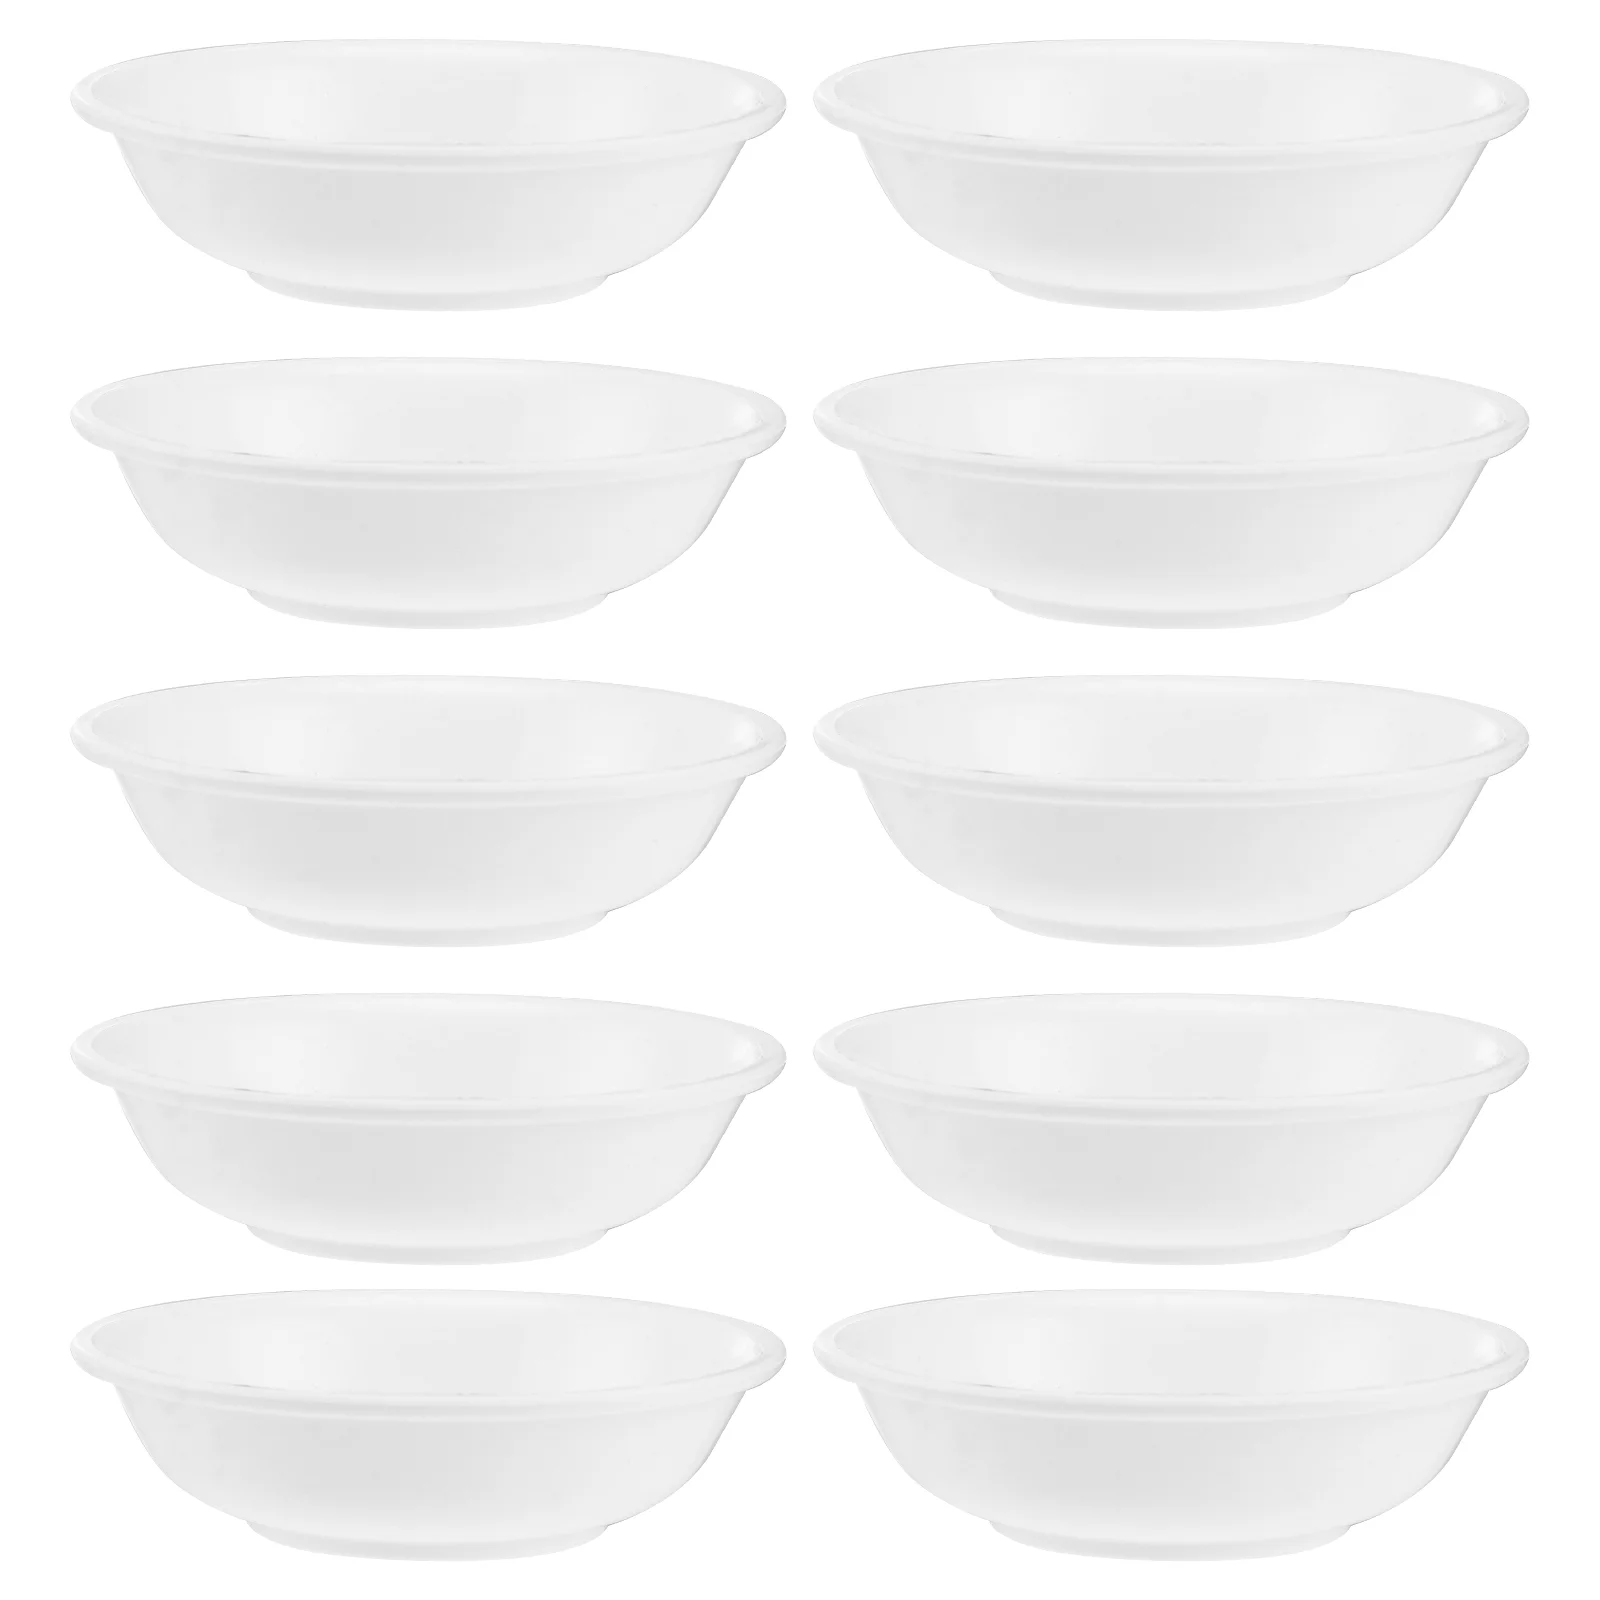 

10 Pcs White Dishes Snack Serving Mini Appetizer Plate Dessert Tray Food Sauce Sushi Soy Dipping Bowl Seasoning